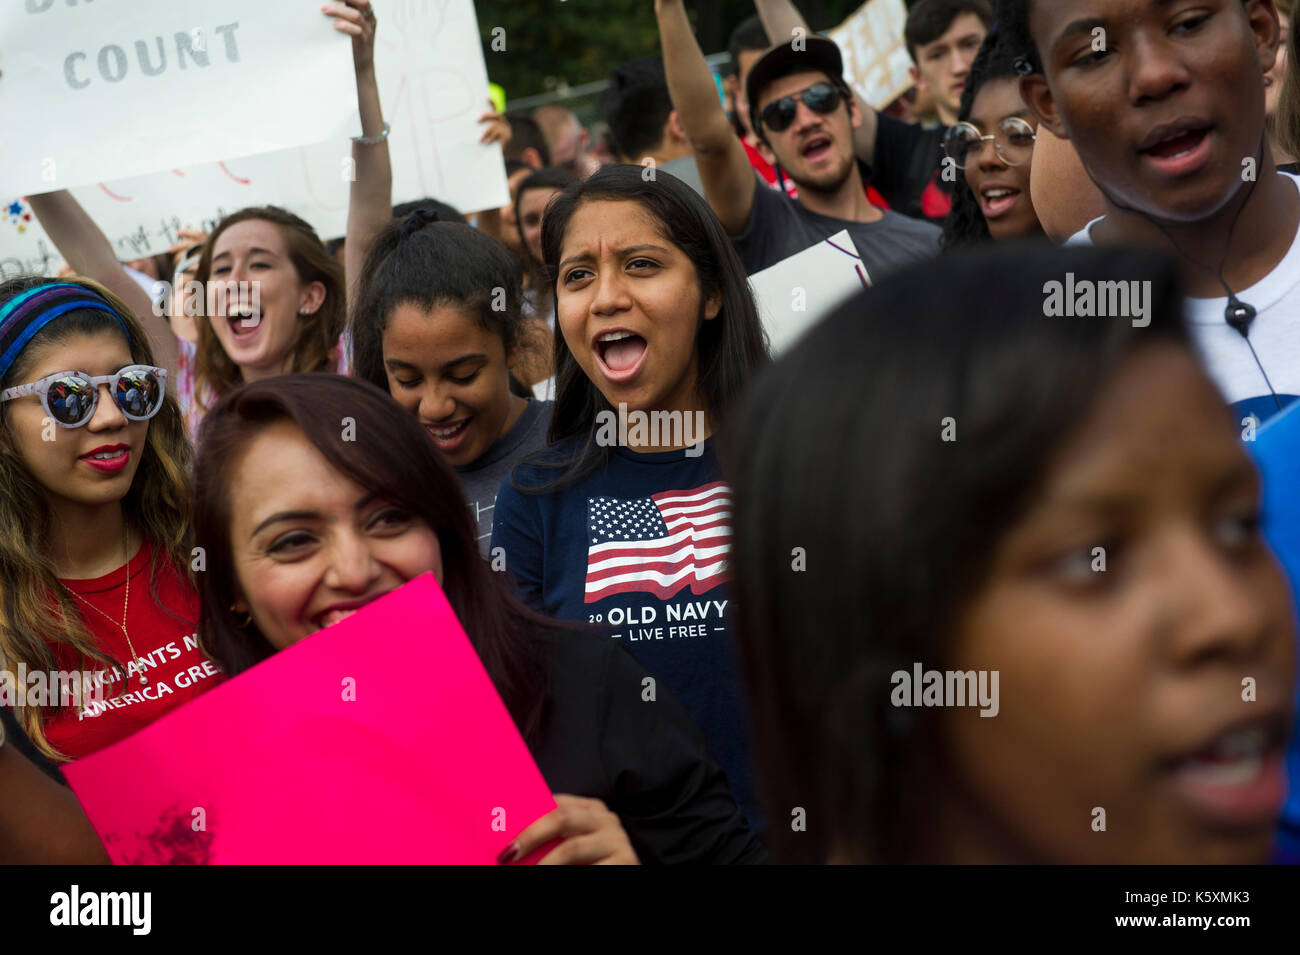 A young lady chanting anti Trump slogans during the protest. A small crowd gathers in front of the White House to protest President Donald Trump's intention to rescind the Deferred Action for Childhood Arrivals Act, also known as DACA or the Dream Act. Deferred Action for Childhood Arrivals (DACA) is a kind of administrative relief from deportation. The purpose of DACA is to protect eligible immigrant youth who came to the United States when they were children from deportation. DACA gives young undocumented immigrants: 1) protection from deportation, and 2) a work permit. The program expires a Stock Photo